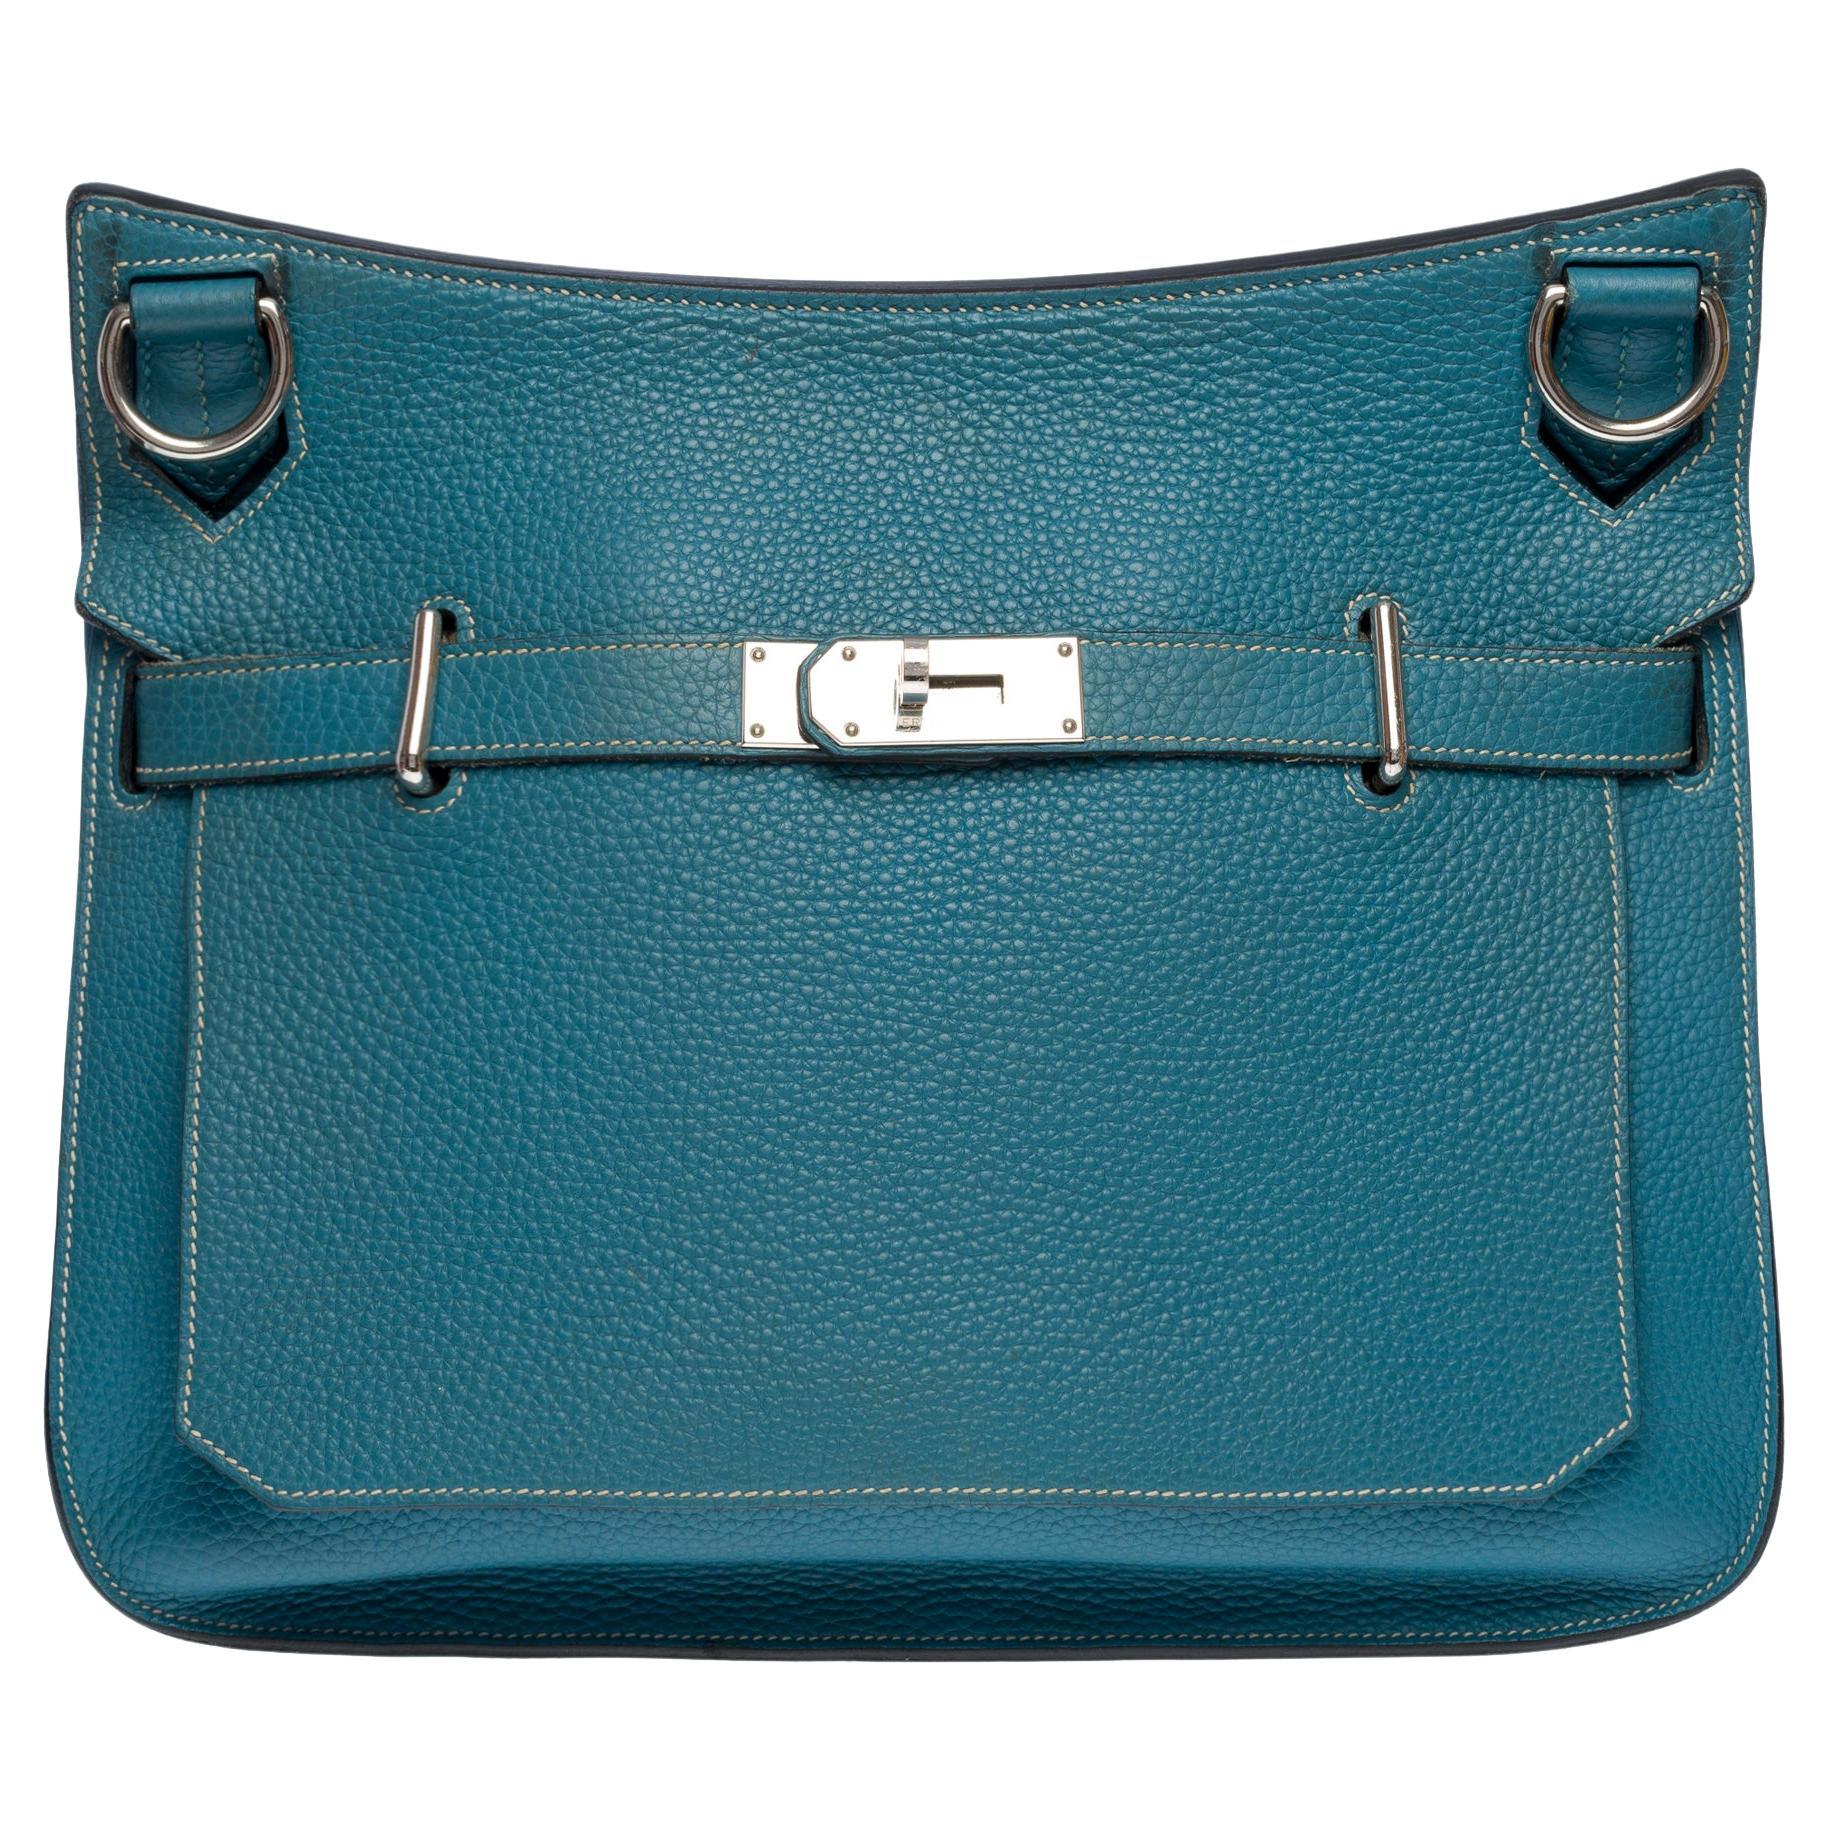 Beautiful Hermes Jypsière 32 shoulder bag in Blue Jean Taurillon Clemence leather, palladium metal hardware, adjustable leather strap in Blue Taurillon leather allowing a shoulder or crossbody carry

Flap closure
Inner lining in blue leather, a